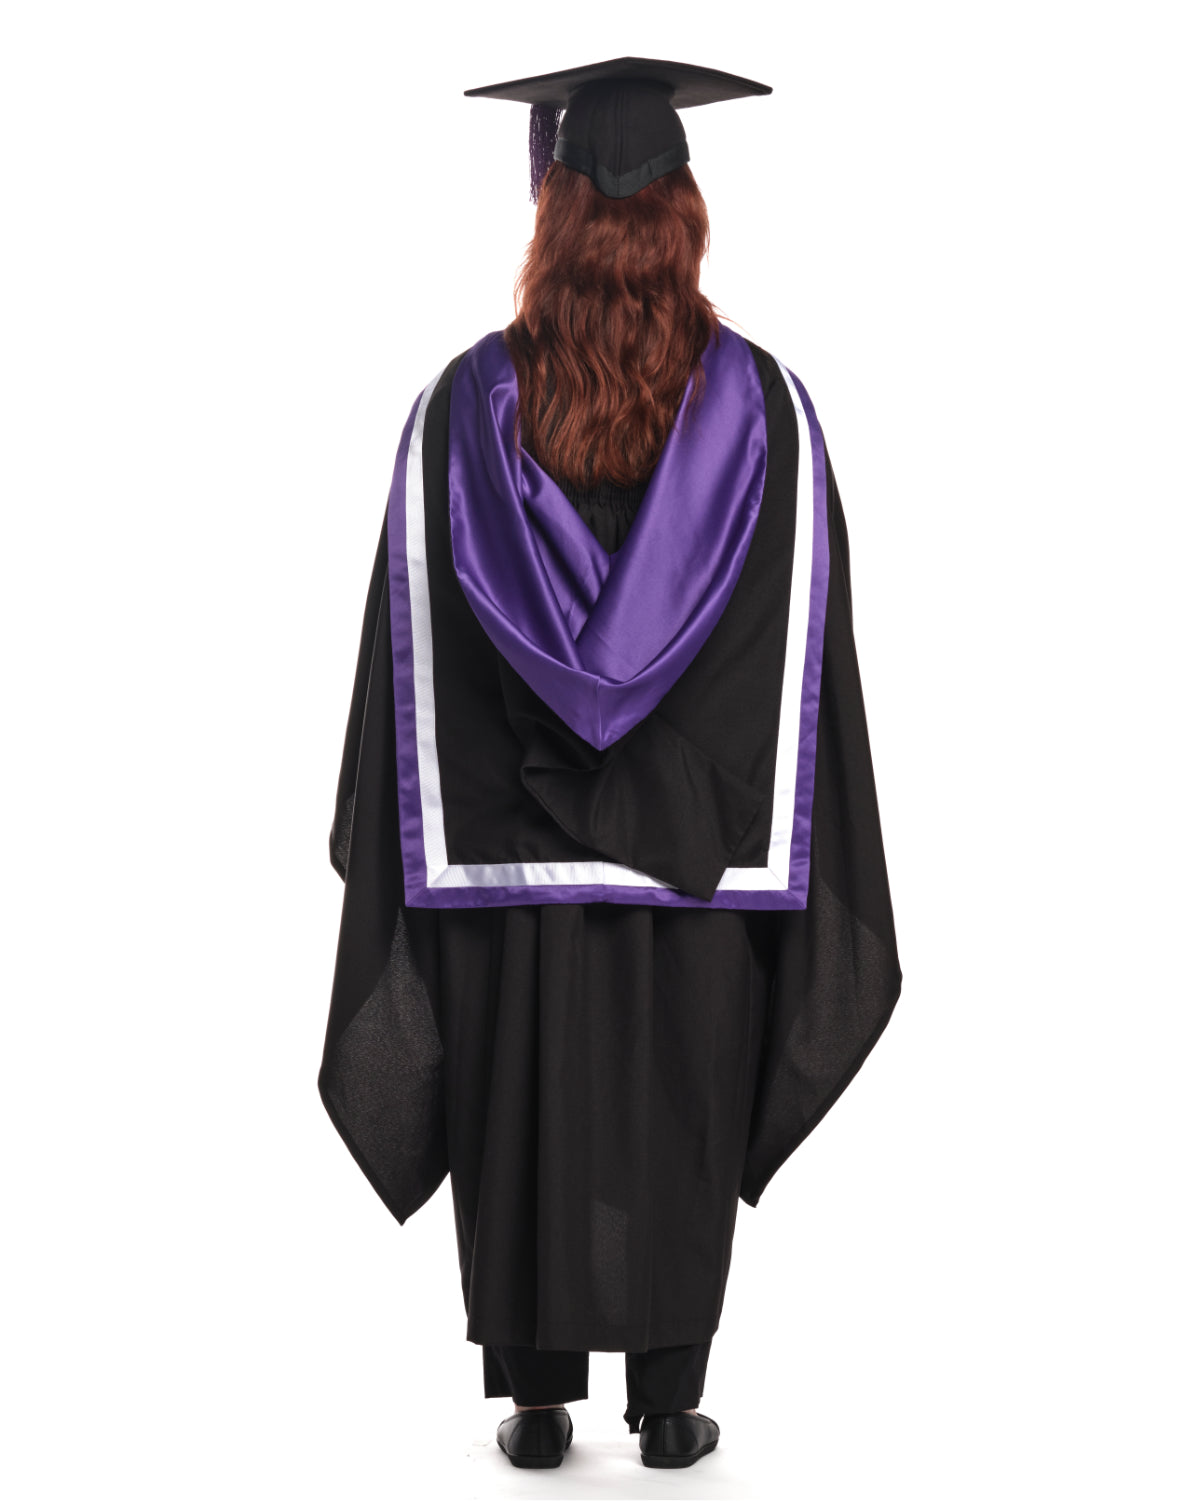 University of Portsmouth | BA | Bachelor of Arts Gown, Cap and Hood Set